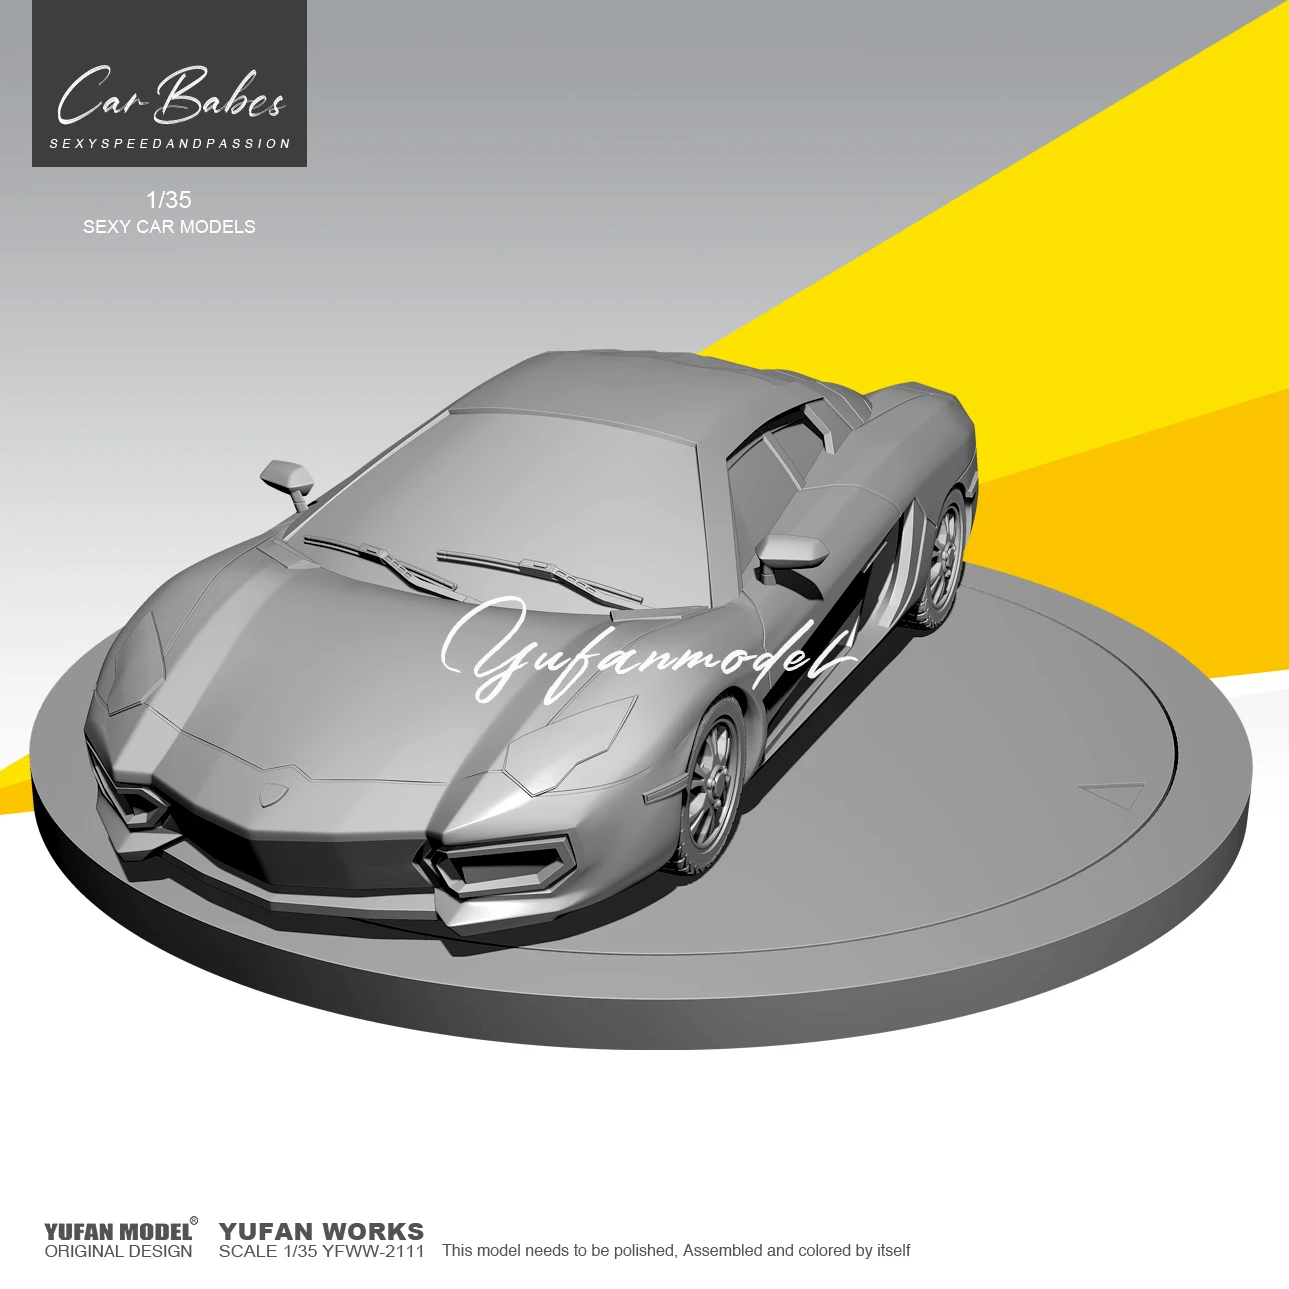 

1/35 YUFAN MODEL Resin model kits figure beauty colorless and self-assembled (Only one car) YFWW-2111